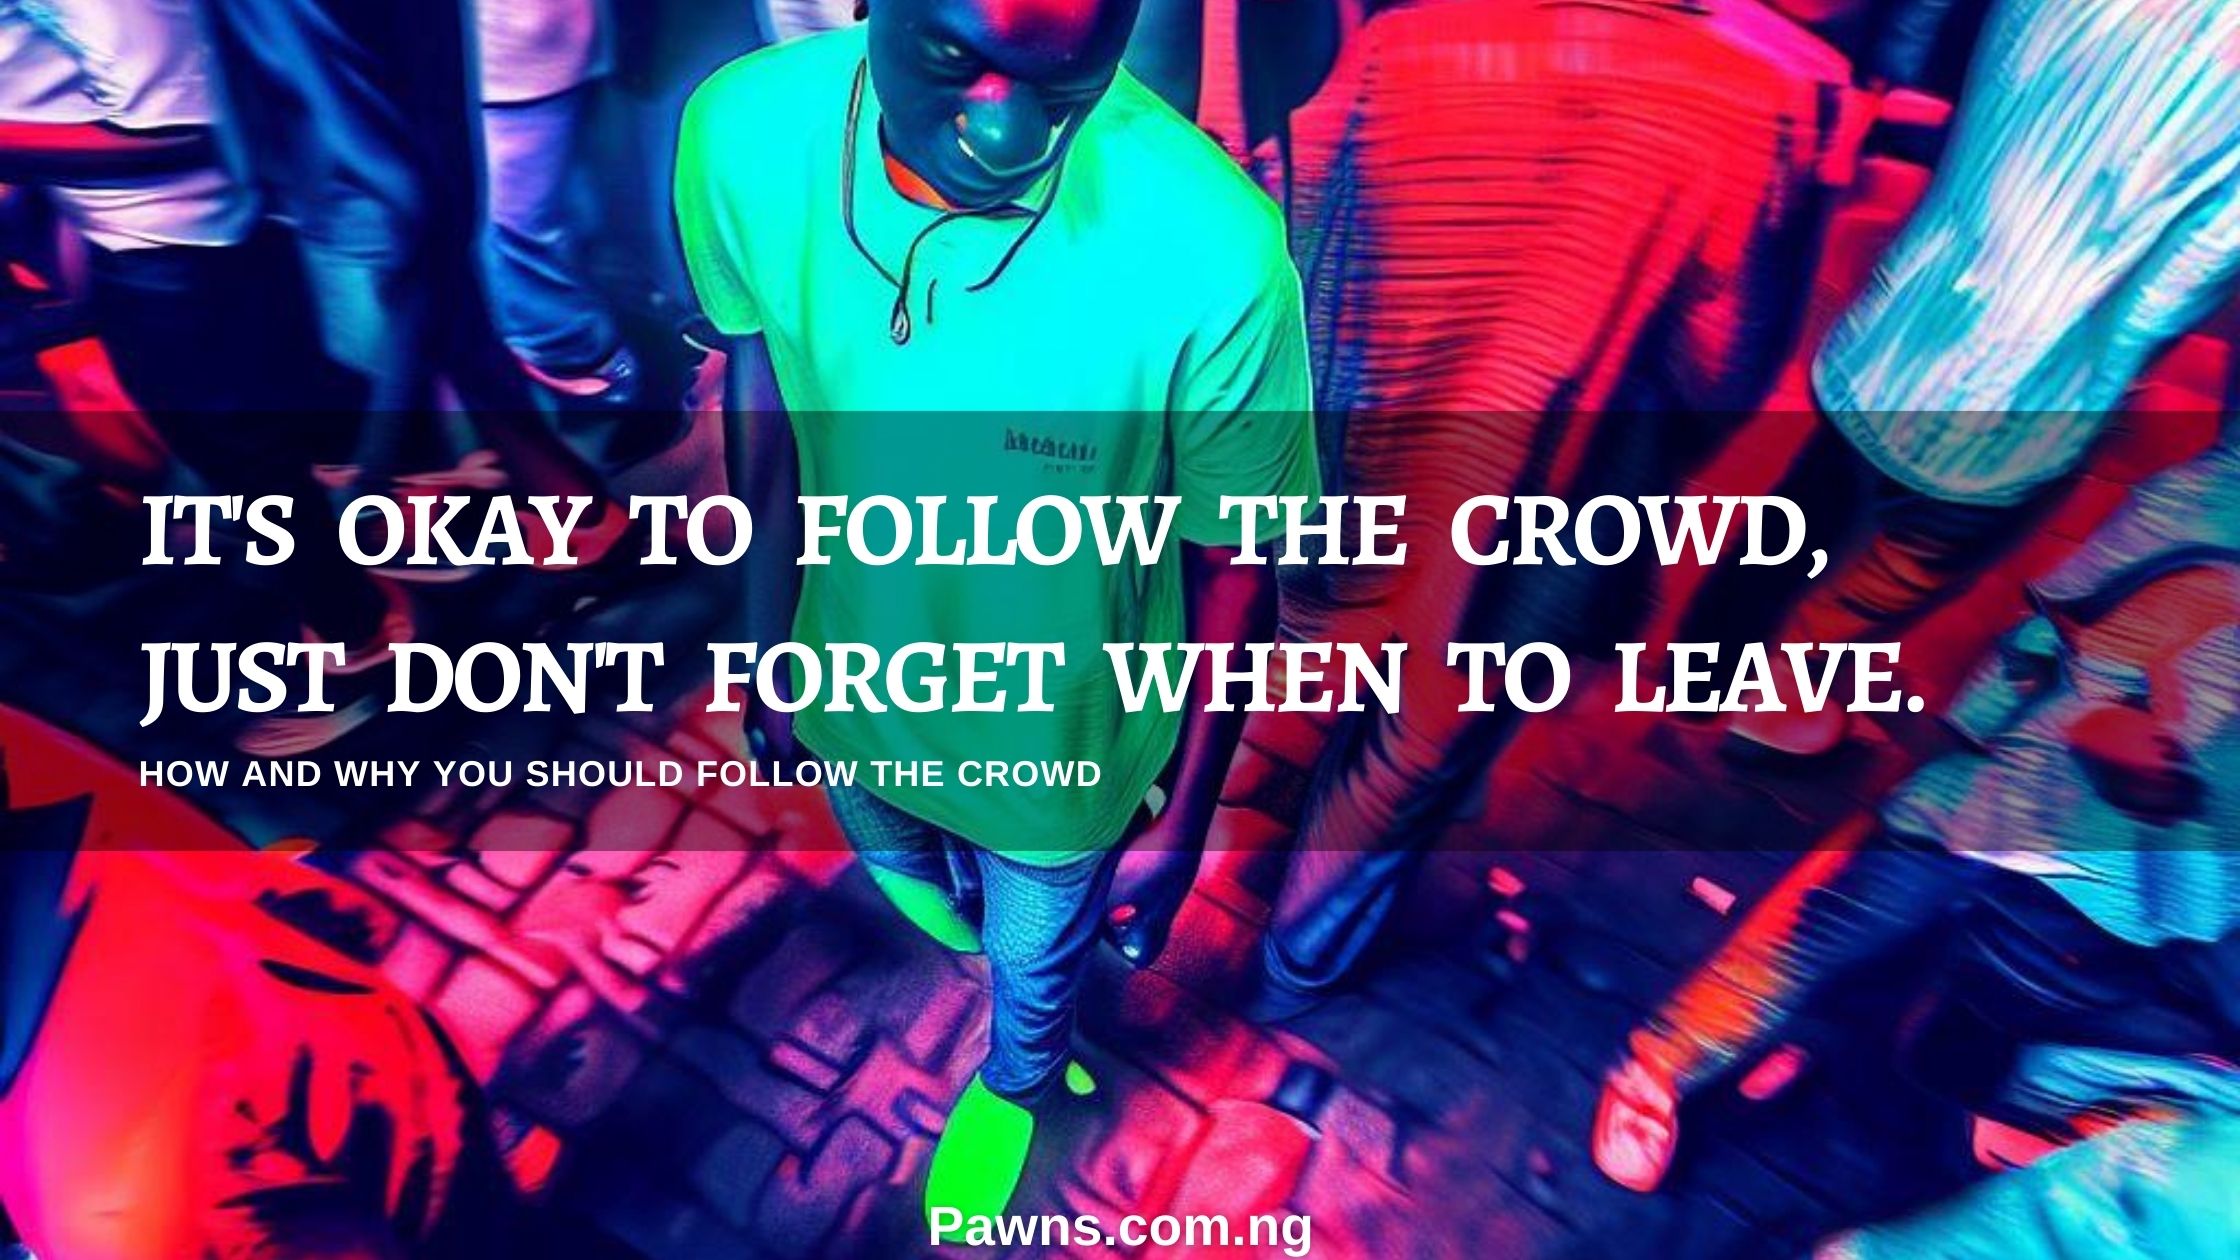 IT'S OKAY TO FOLLOW THE CROWD, JUST DON'T FORGET WHEN TO LEAVE. HOW AND WHY YOU SHOULD FOLLOW THE CROWD